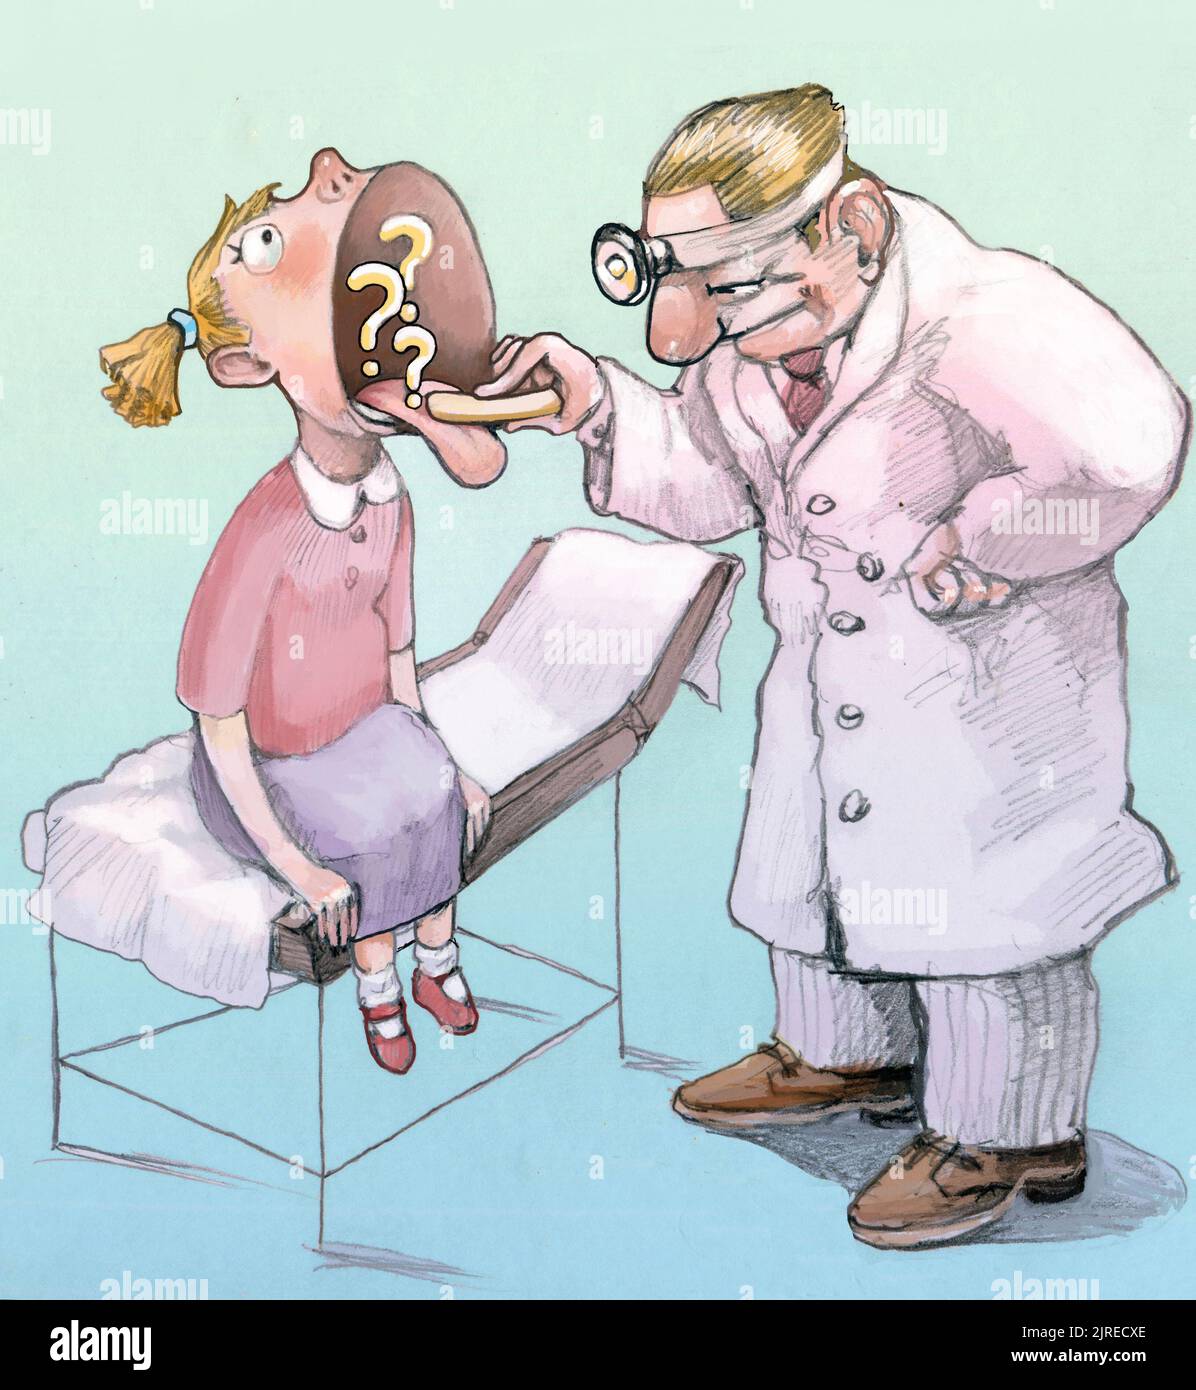 a girl visited in a clinic inside the wide open mouth you see question marks metaphor for a medical check-up Stock Photo